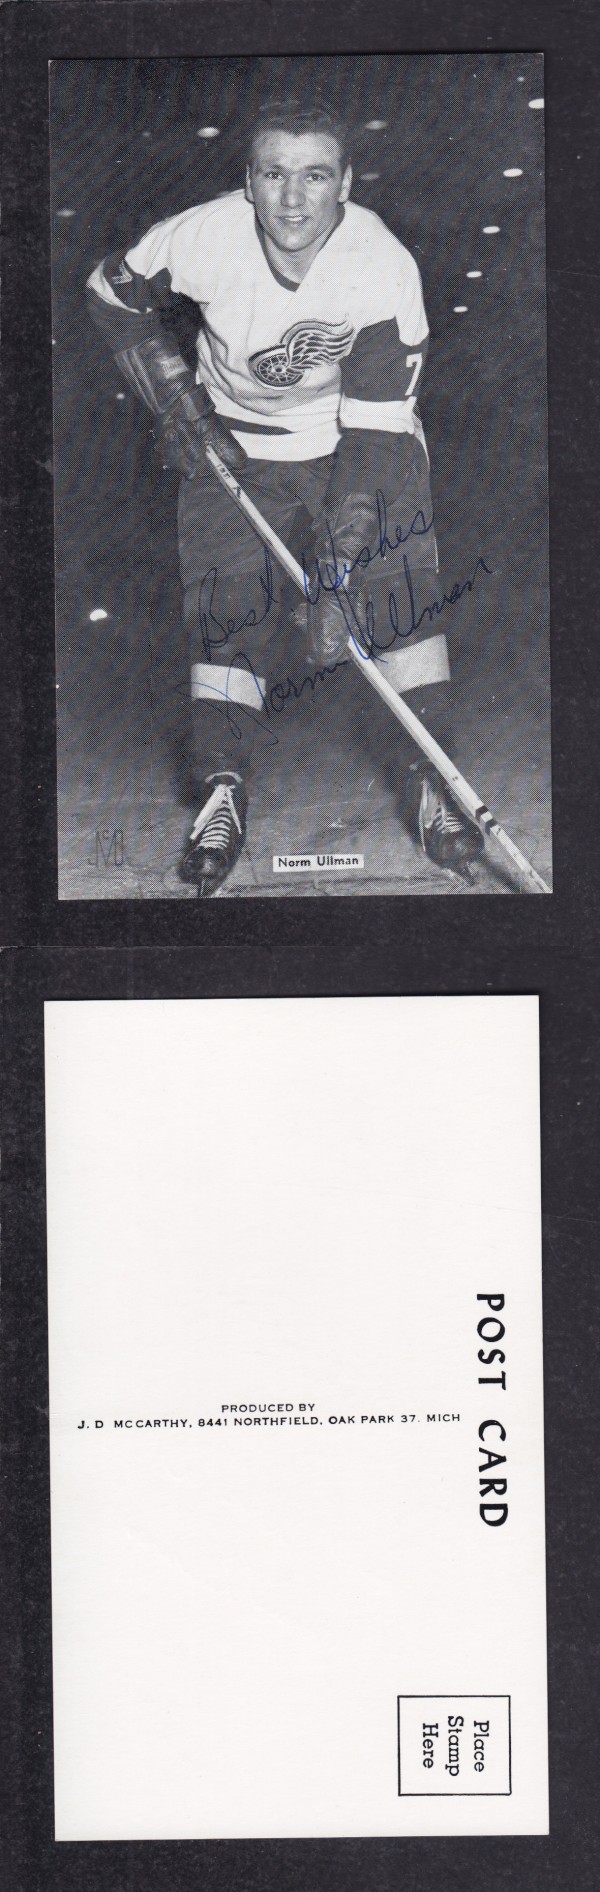 1960 'S DETROIT RED WINGS N.ULLMAN AUTOGRAPHED POST CARD photo